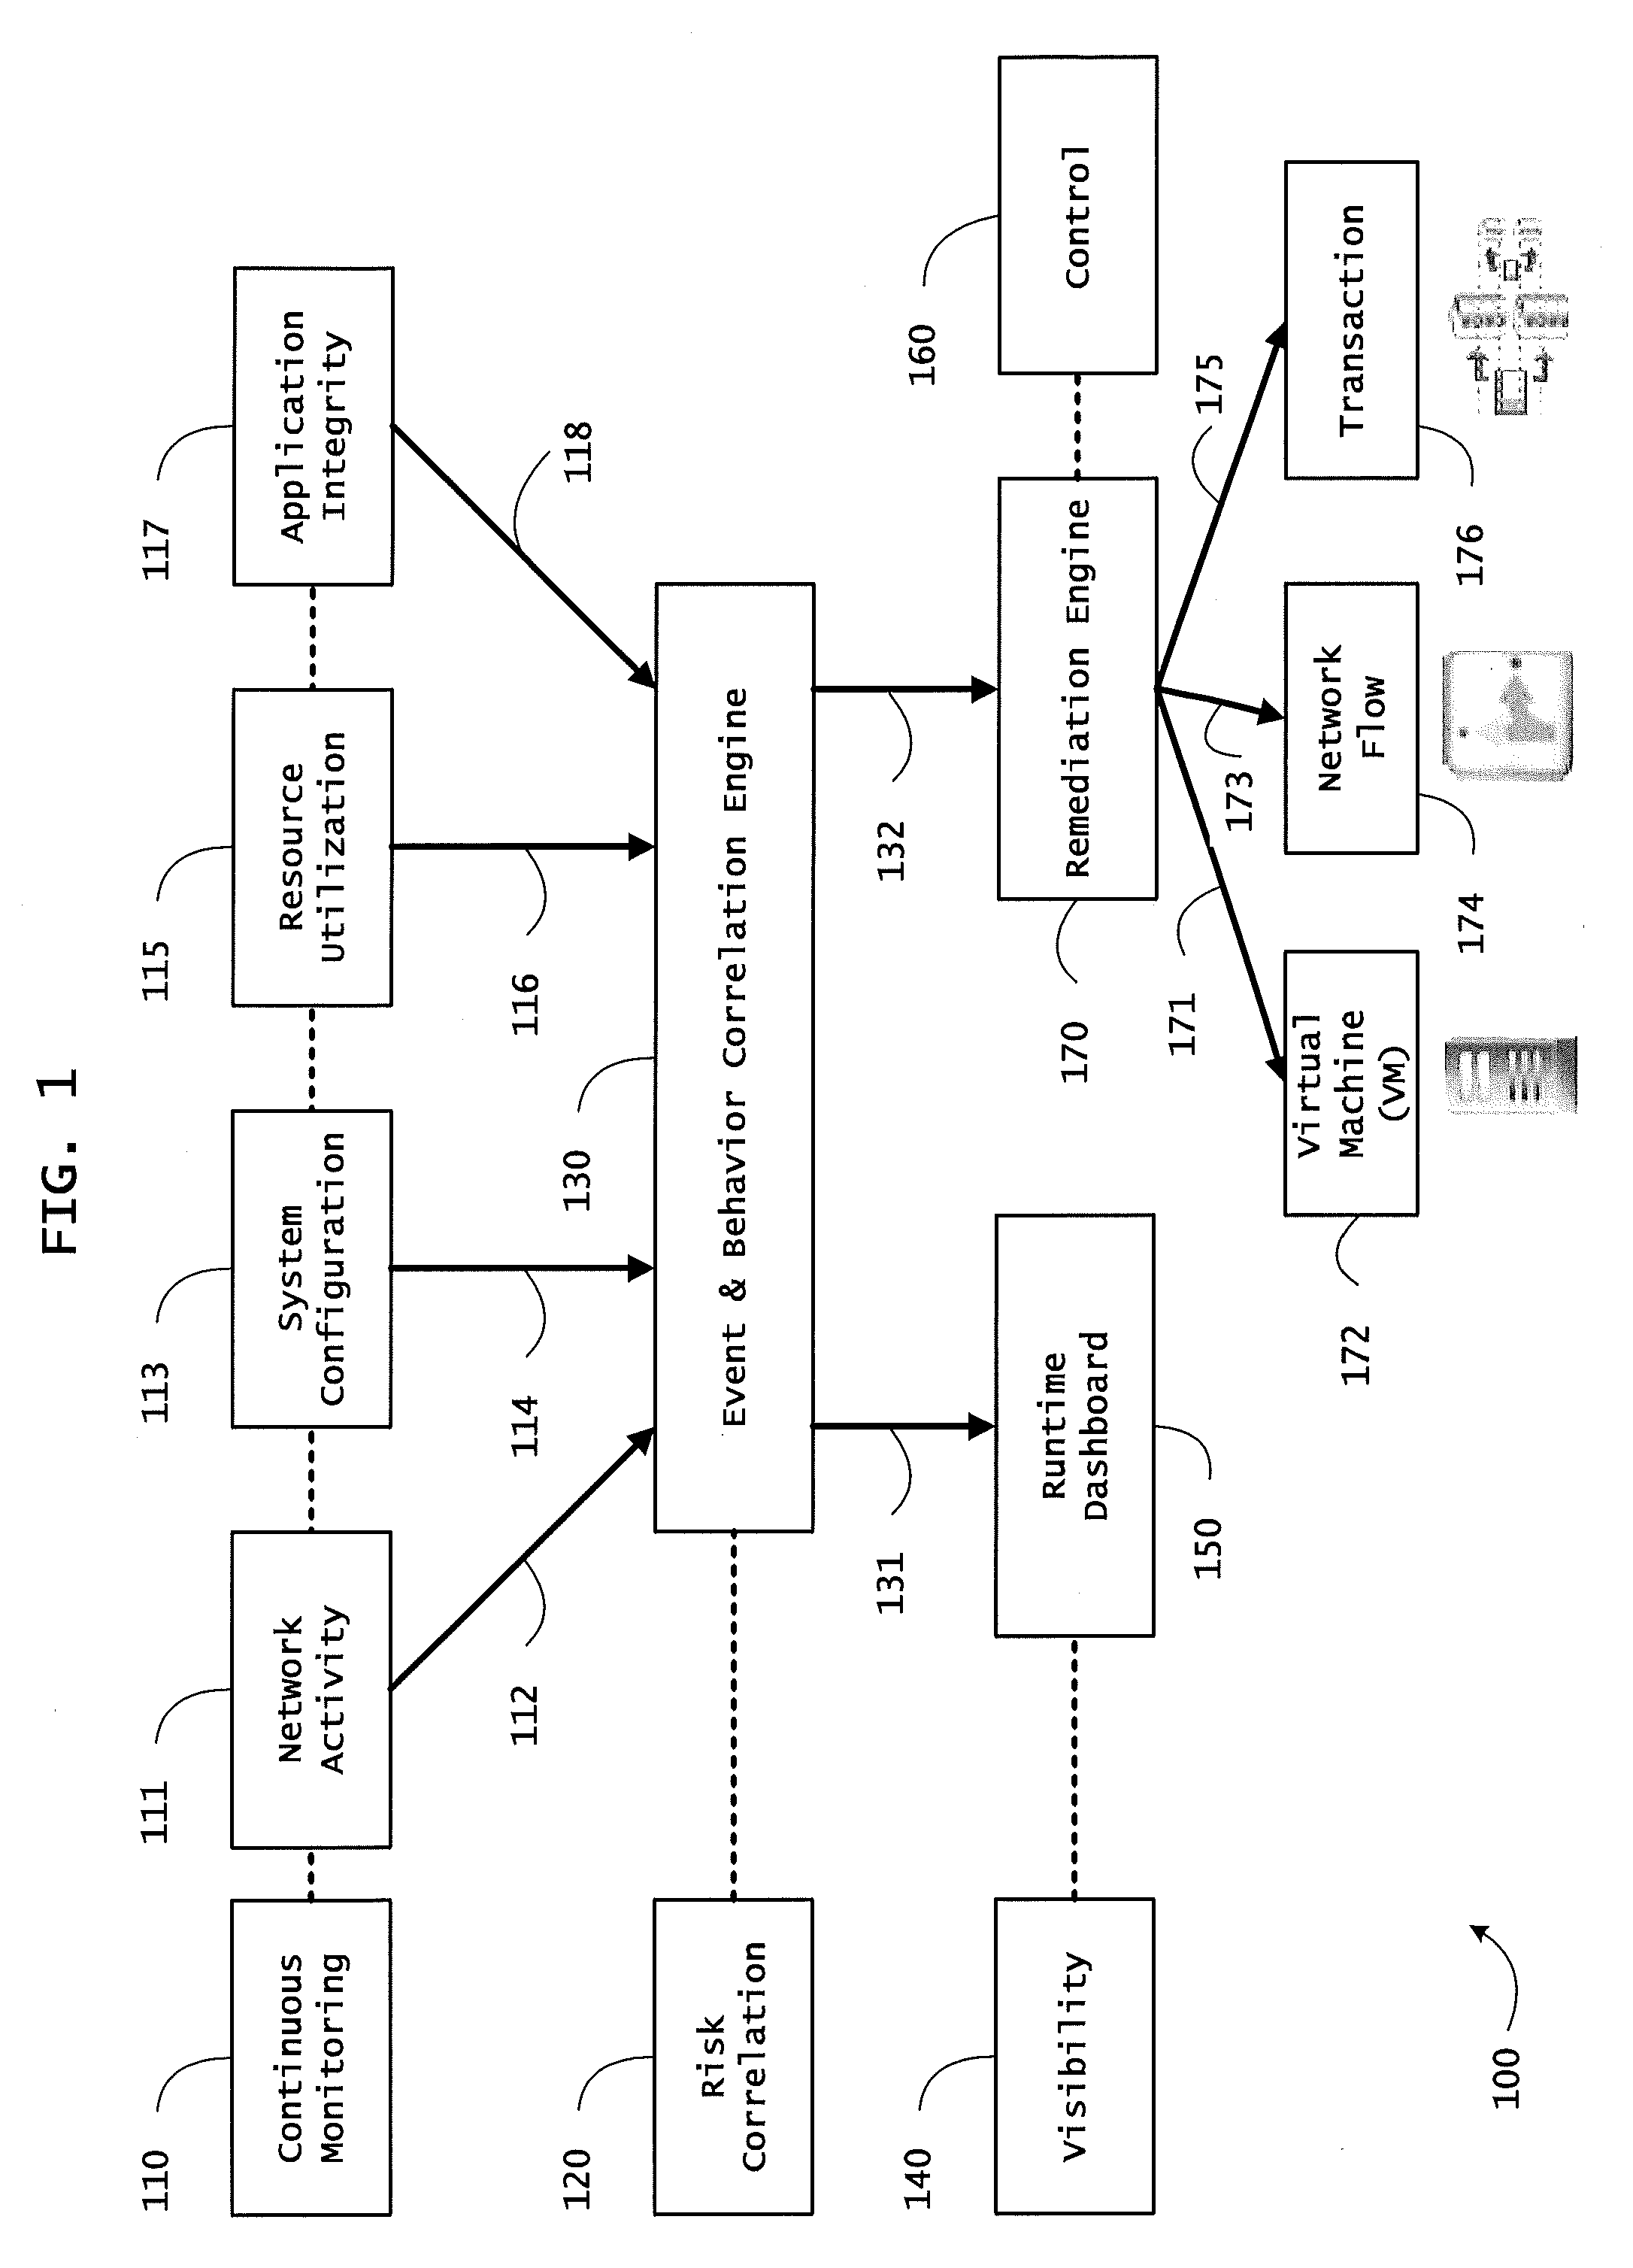 Systems and methods for using reputation scores in network services and transactions to calculate security risks to computer systems and platforms